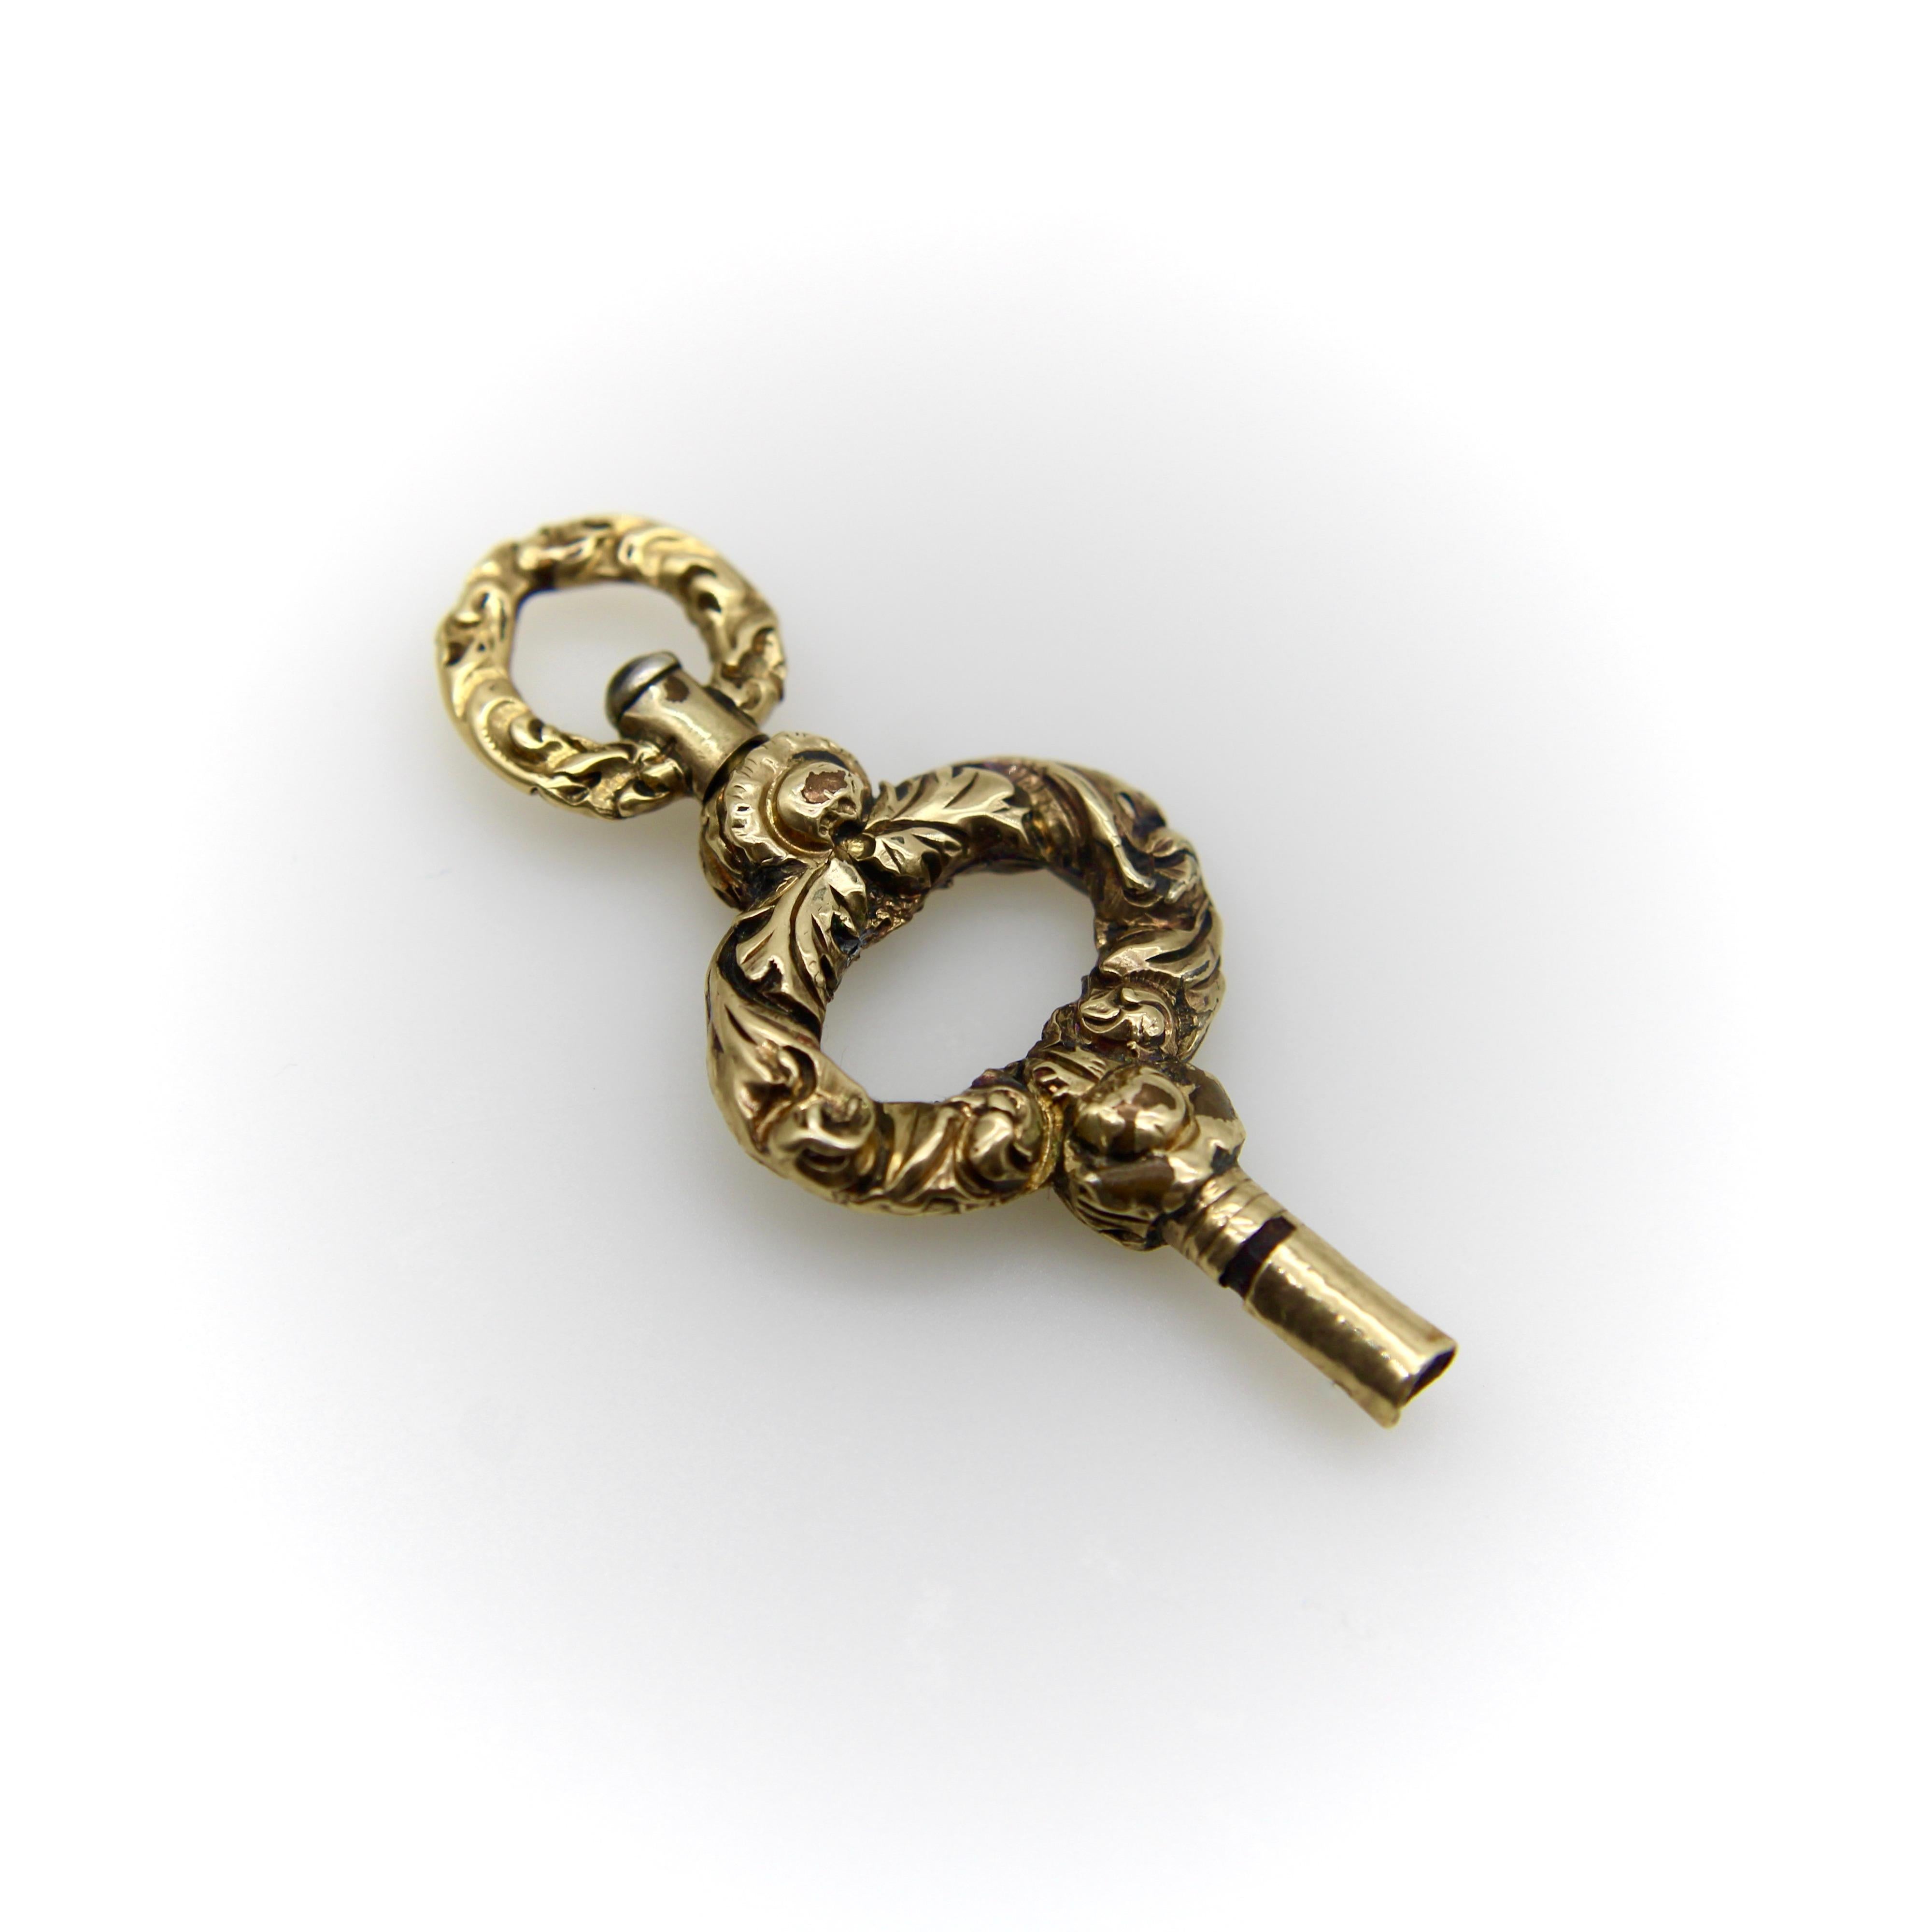 This elaborate gold case Georgian watch key fob is ready to hang on a chain of your choice! The key has nice proportions, is short and squat in shape, with a border of flowing foliate that wraps around the key on both sides. The foliate is